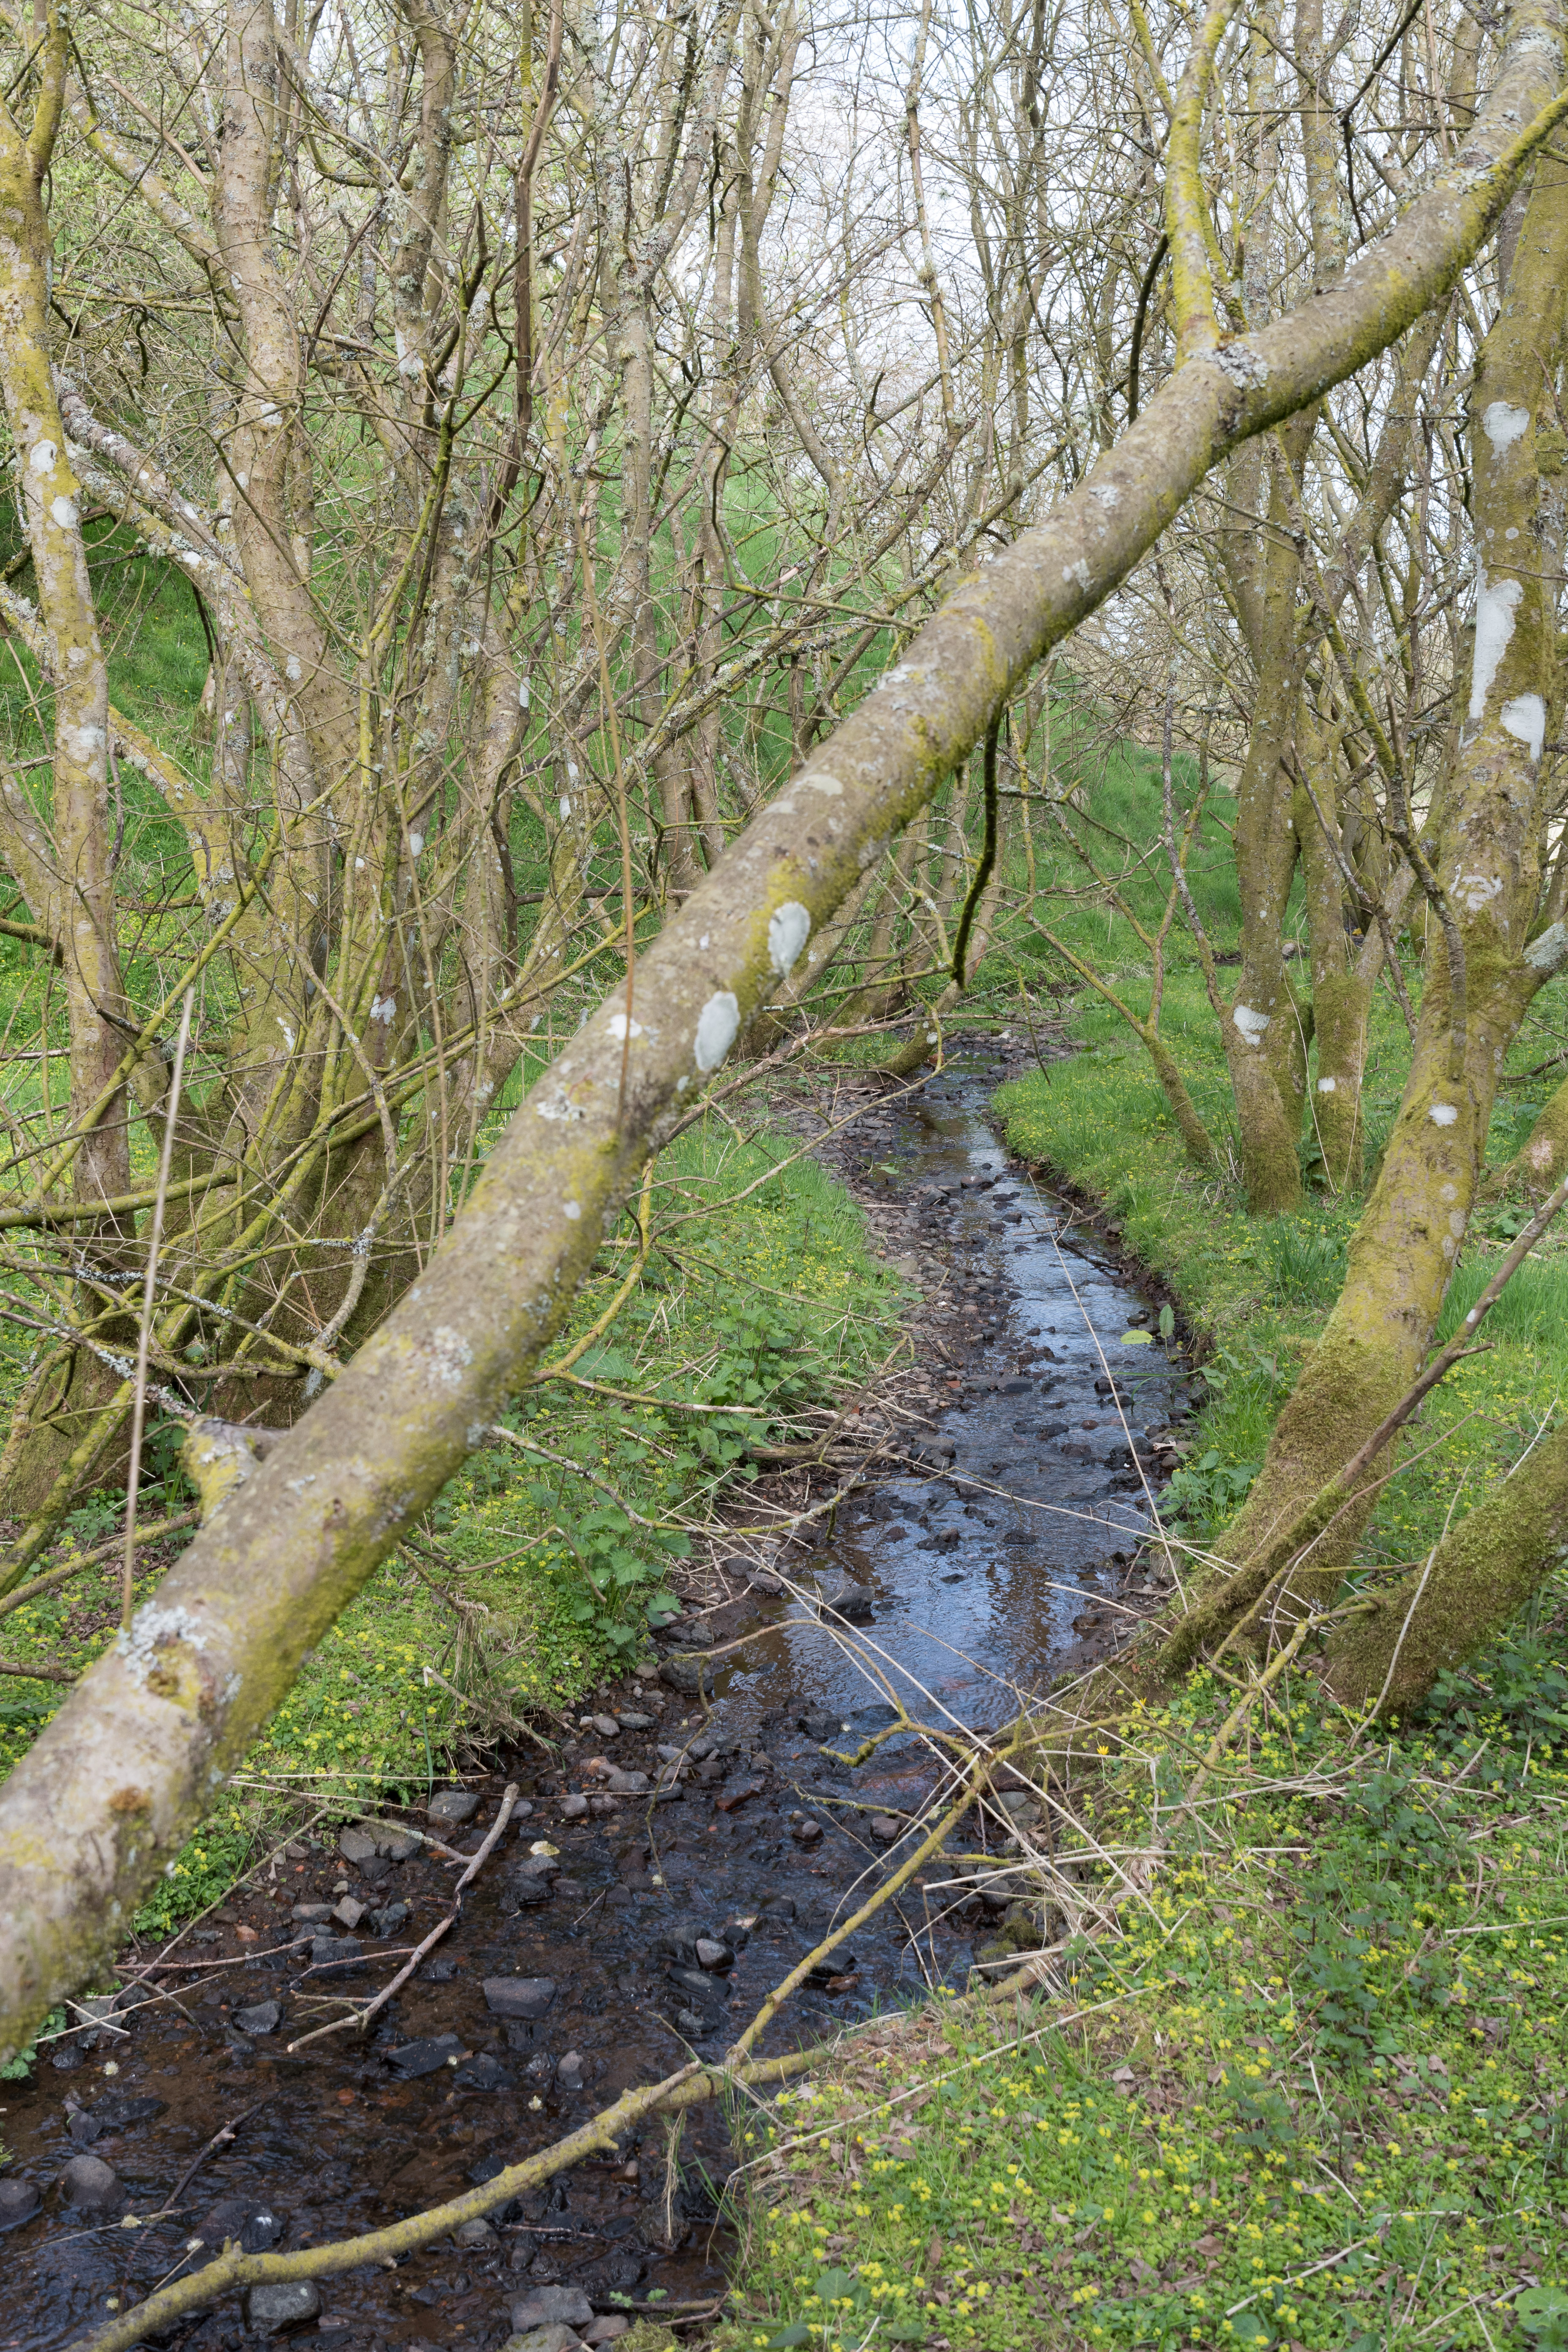 Willow copse with stream running through it